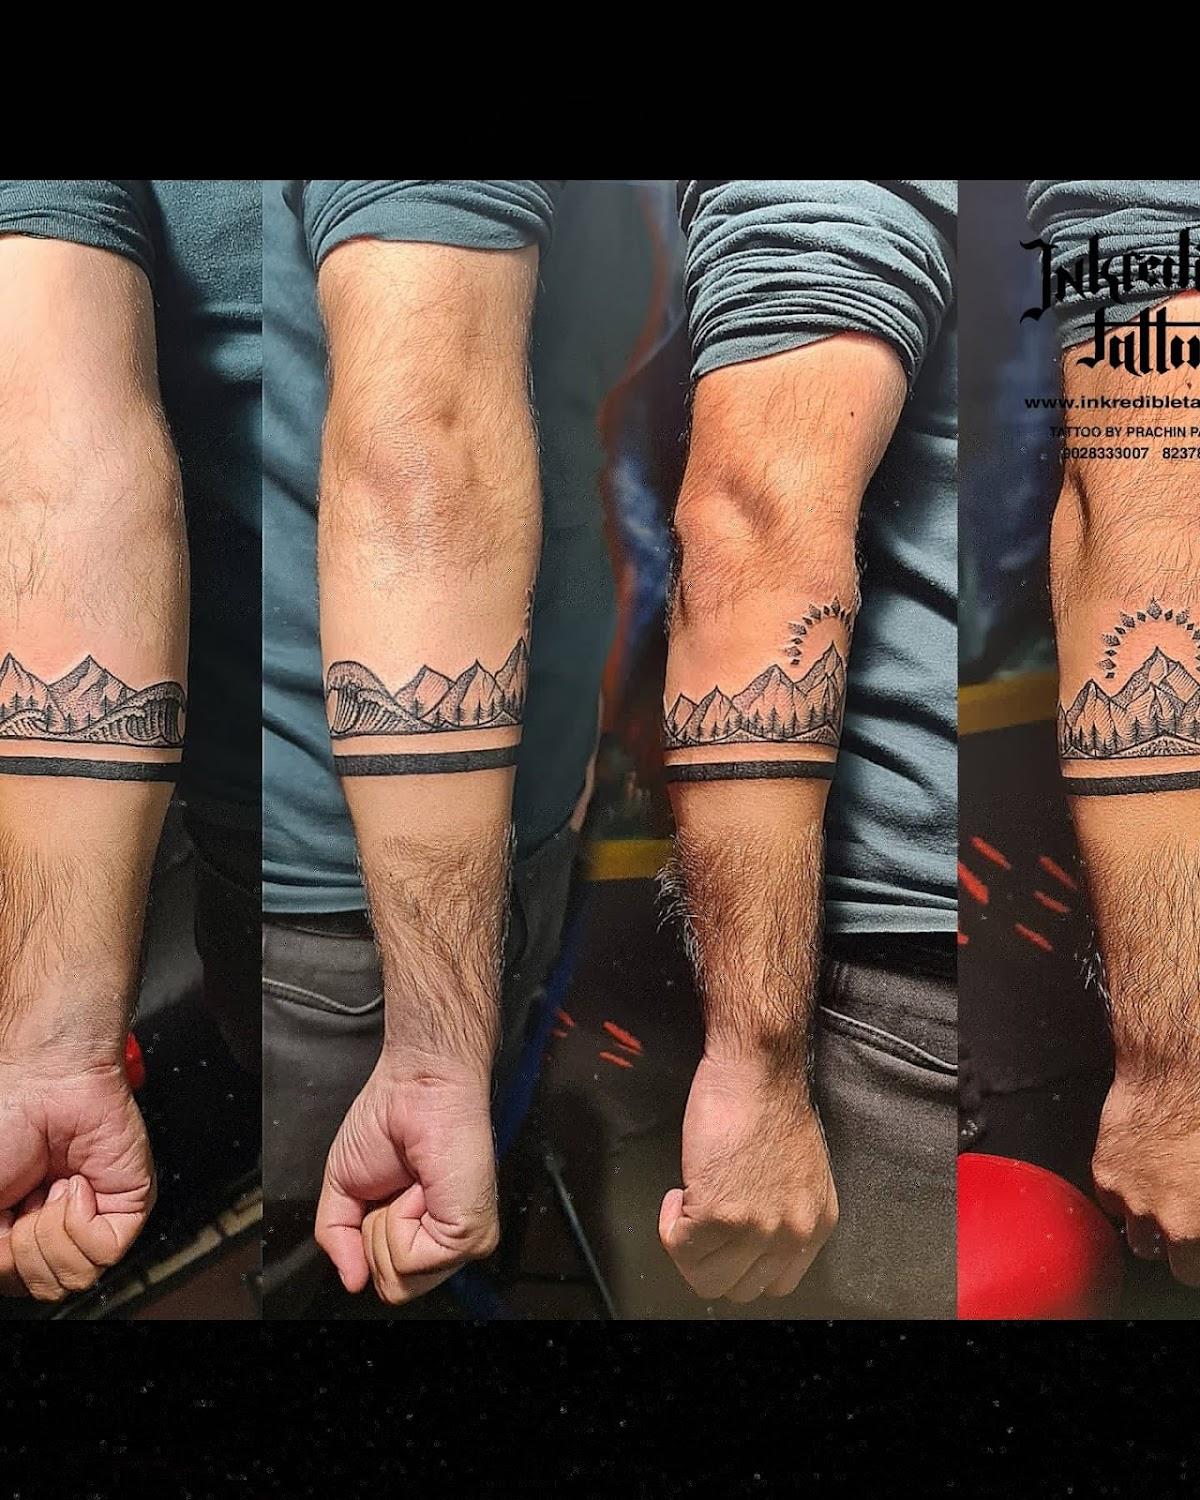 Traditional Tattoo Nepal traditionaltattoonepal  Instagram photos  and videos